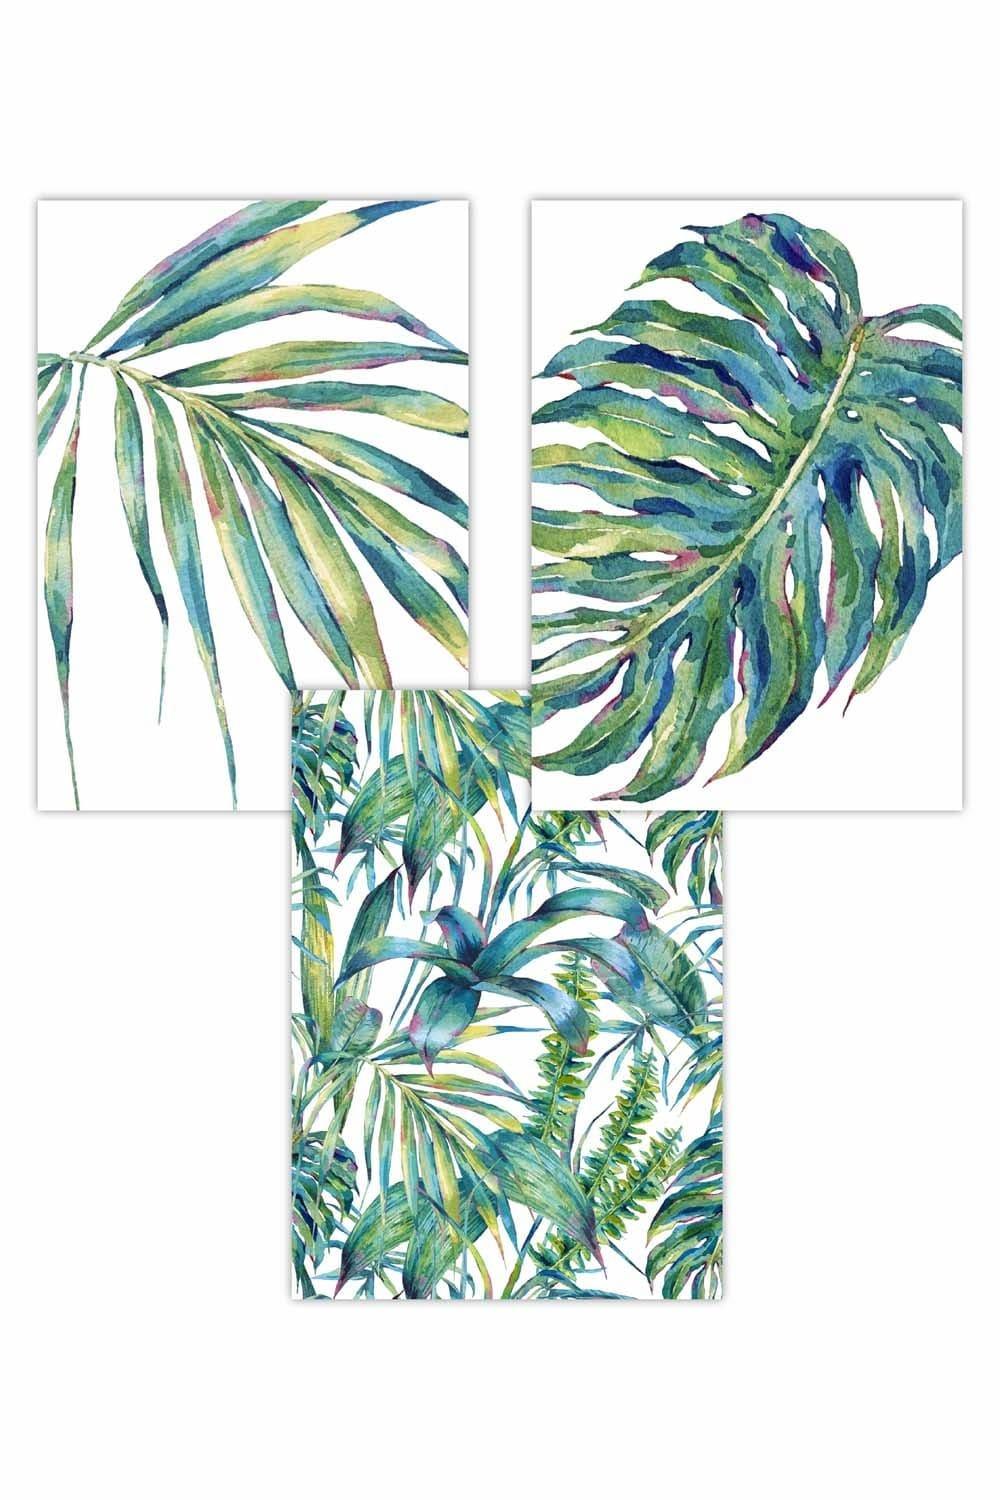 Set of 3 Tropical Plants and Pattern Green Blue Abstract Art Posters